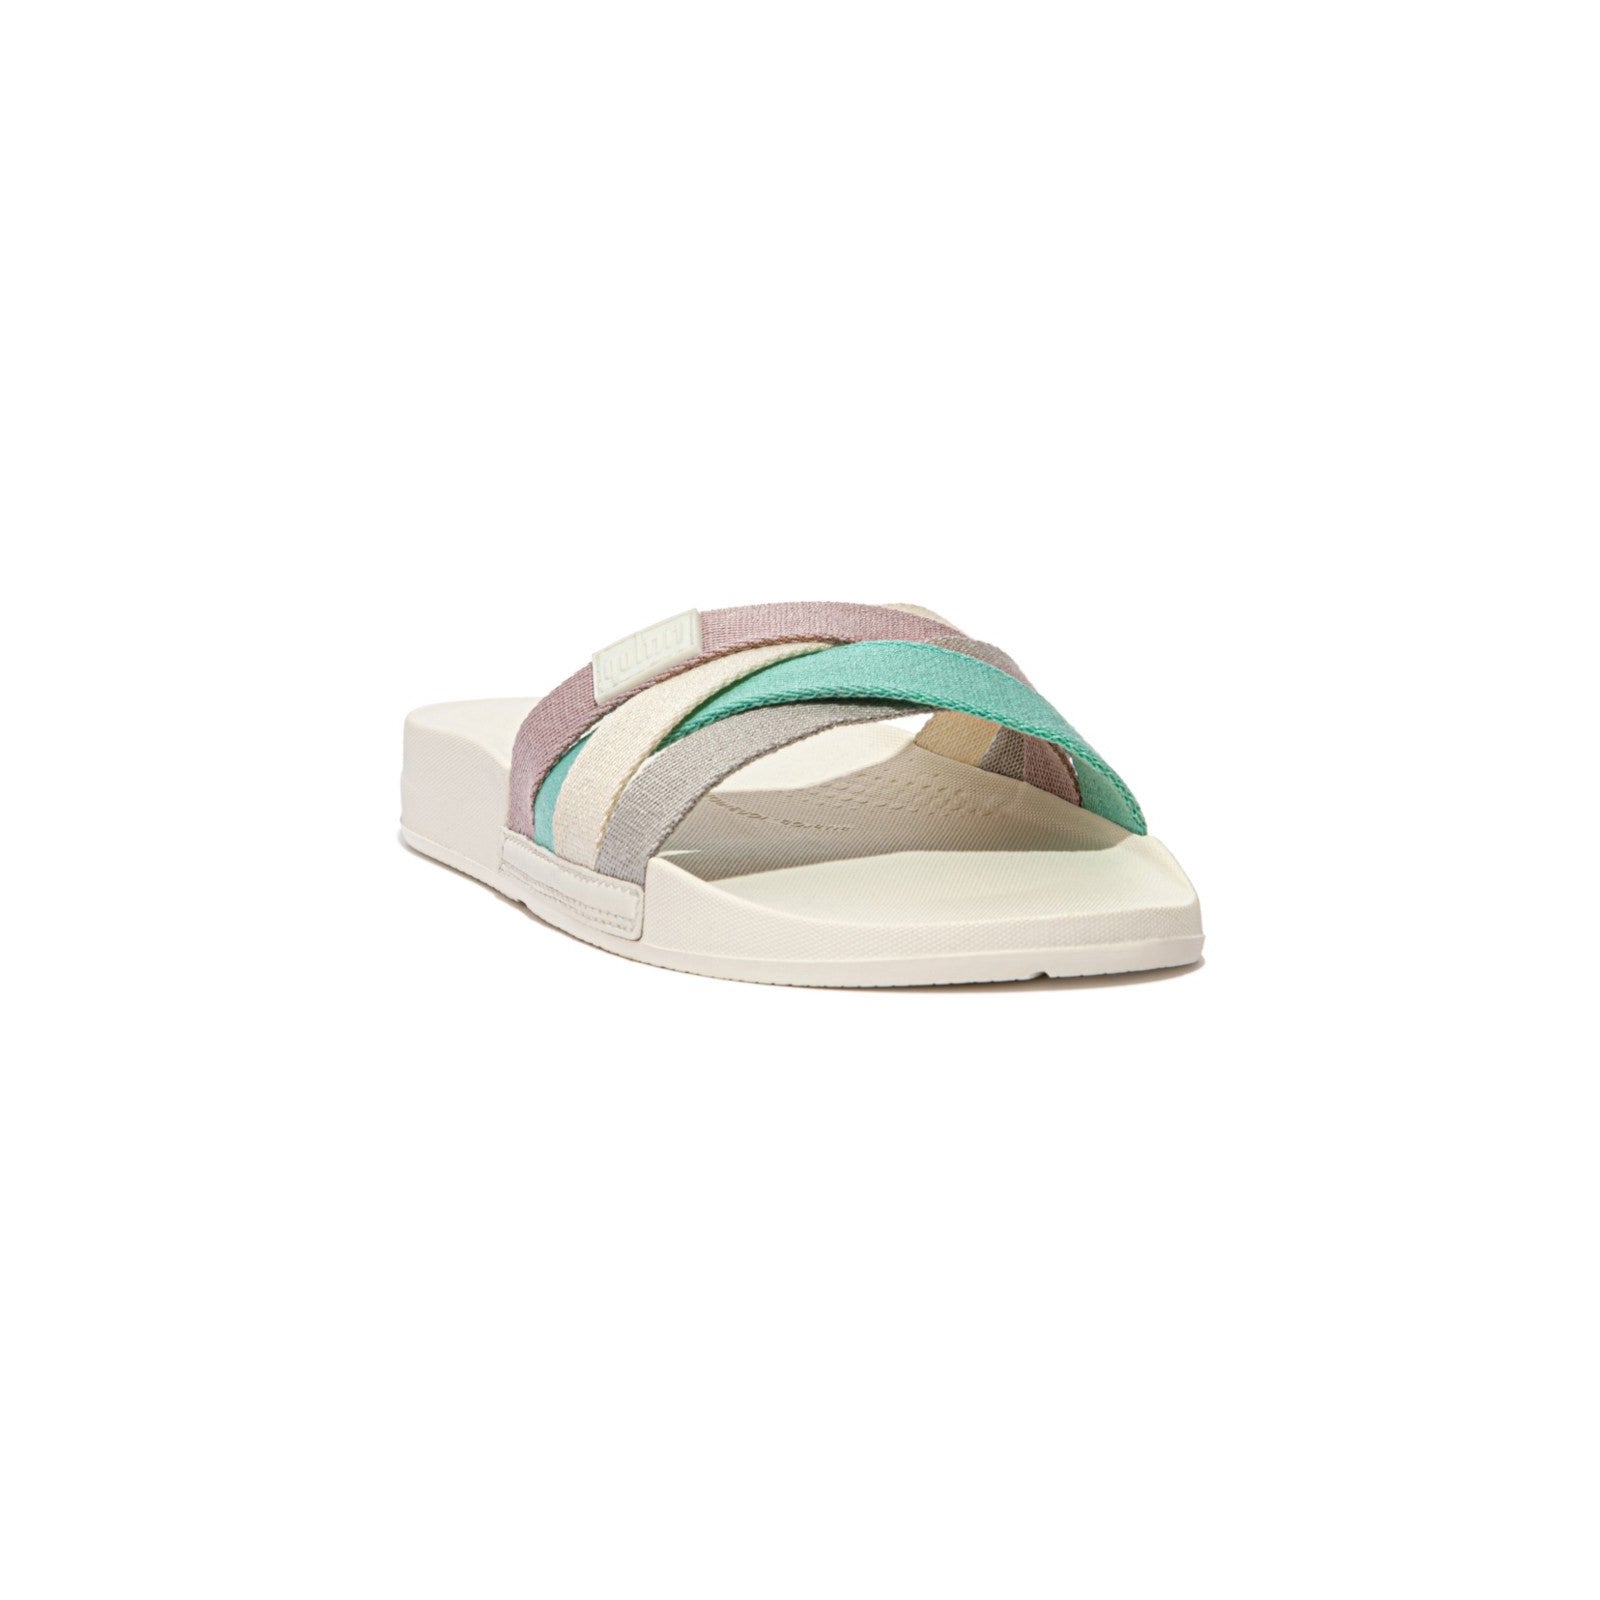 Fitflop iQUSHION Multi-Strap Slides Sandals